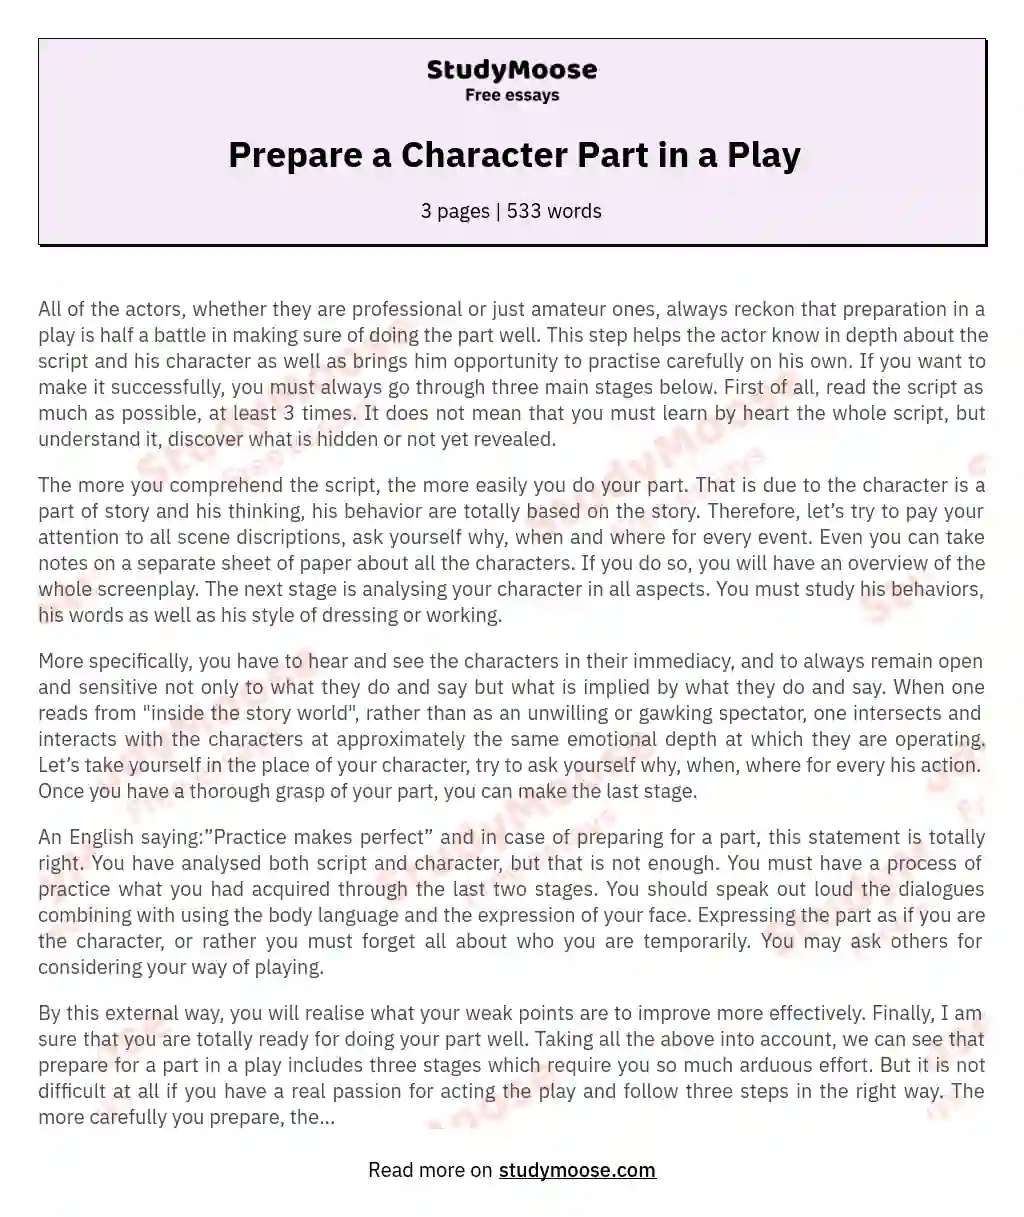 Prepare a Character Part in a Play